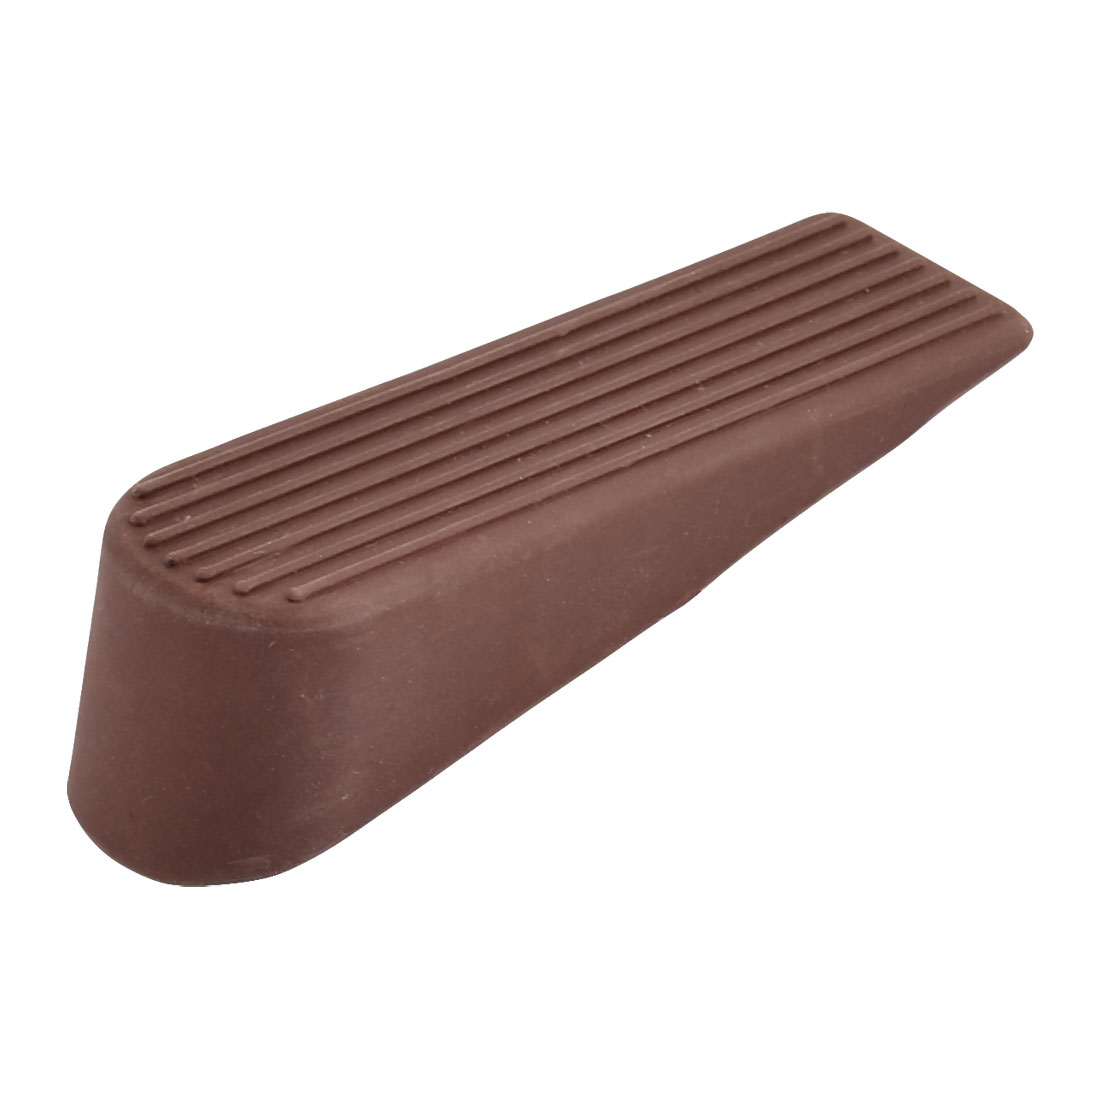 Unique Bargains Household Office Soft Plastic Anti Slip Door Wedge Stopper Protector Brown